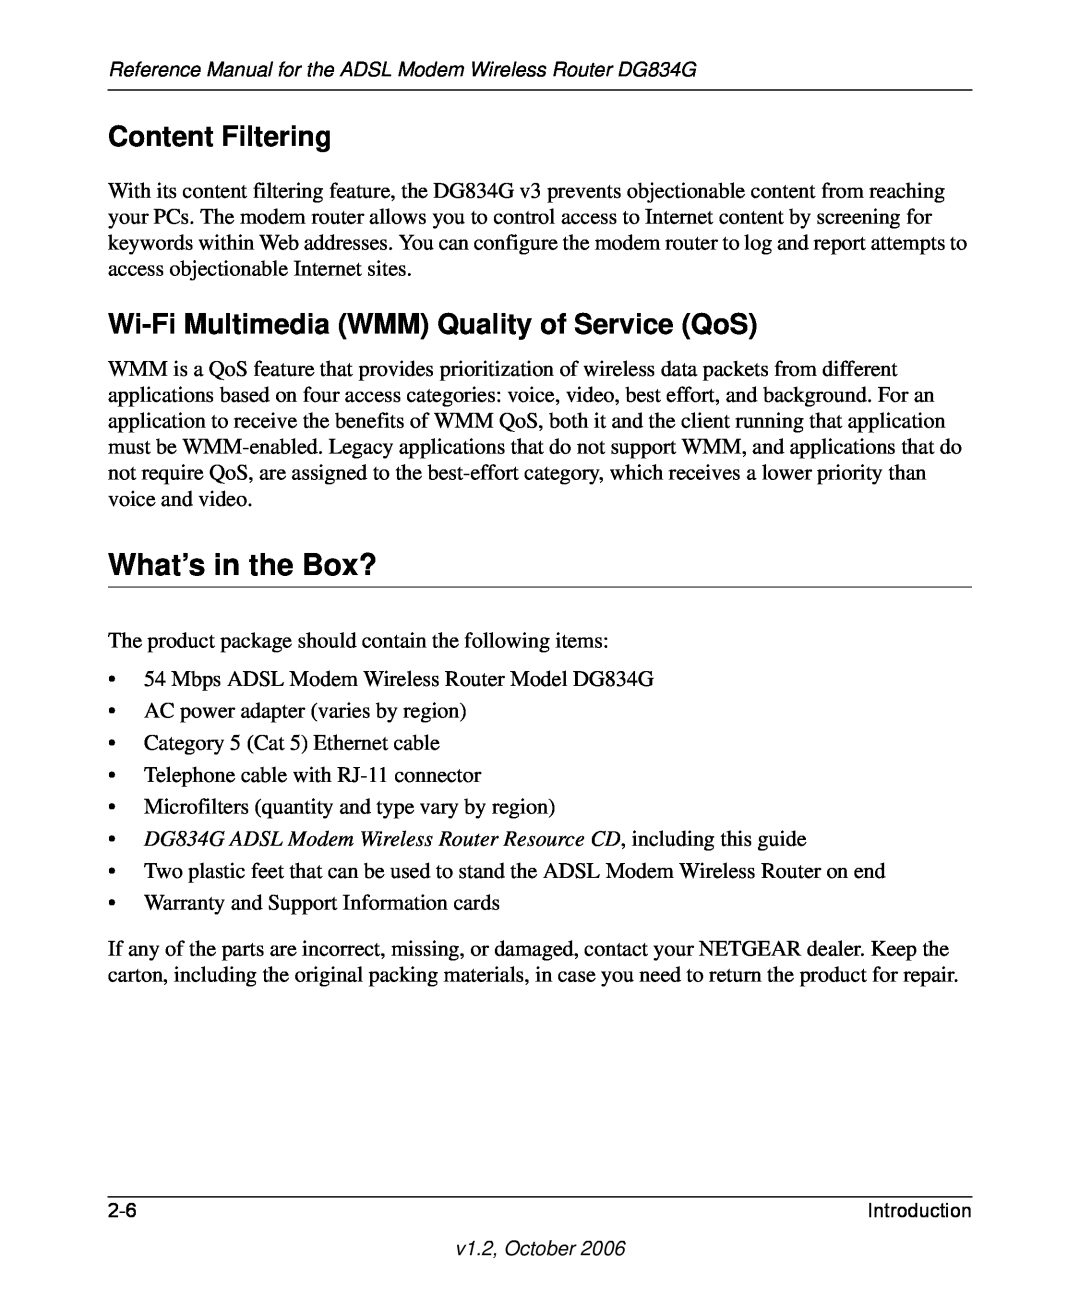 NETGEAR DG834G manual What’s in the Box?, Content Filtering, Wi-Fi Multimedia WMM Quality of Service QoS 